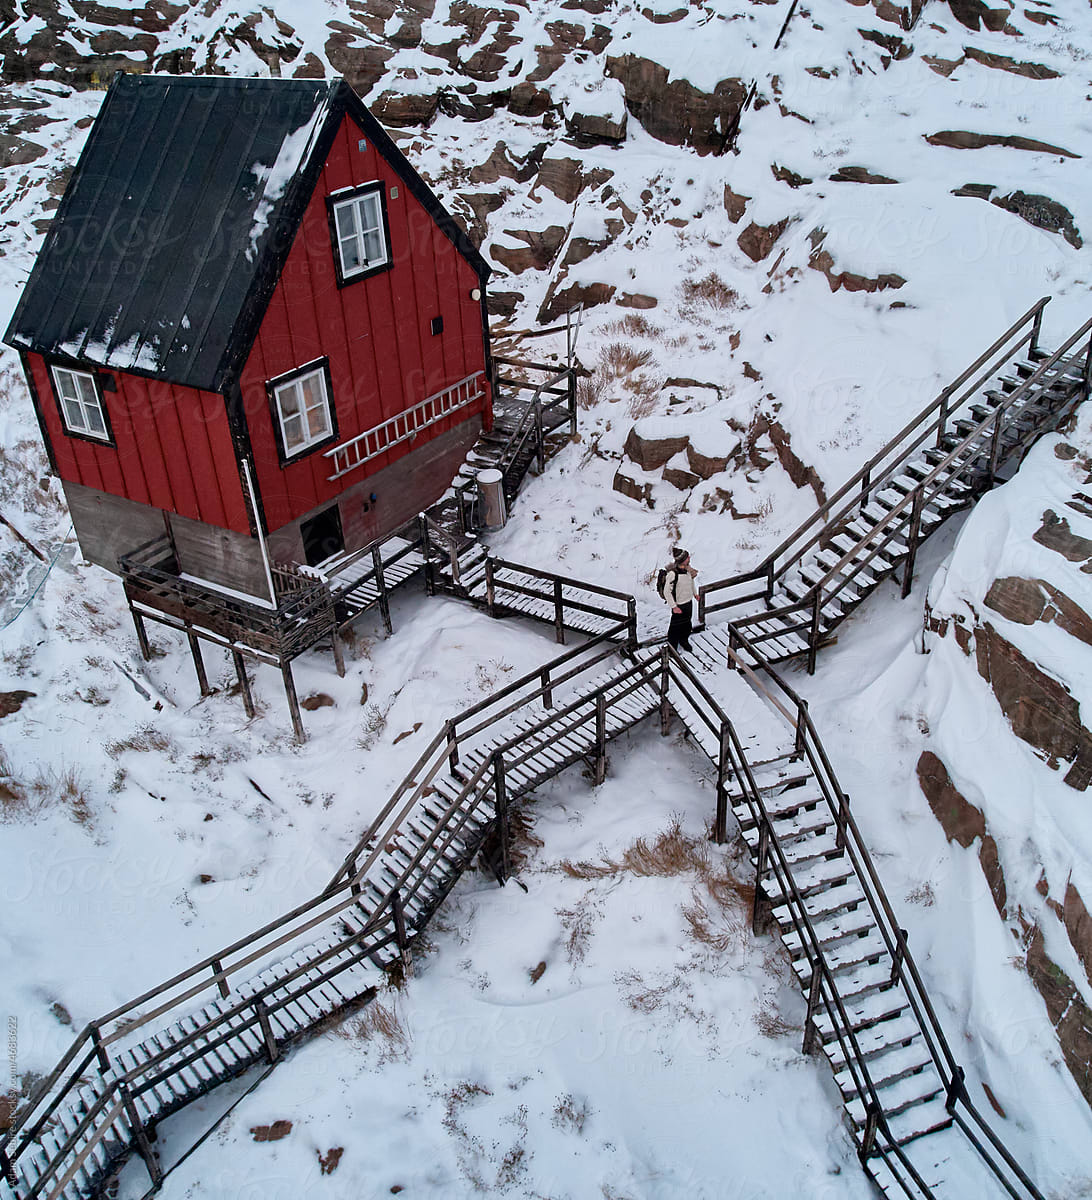 Greenland Arctic, cute red tiny house, Escher stairway, crossroads